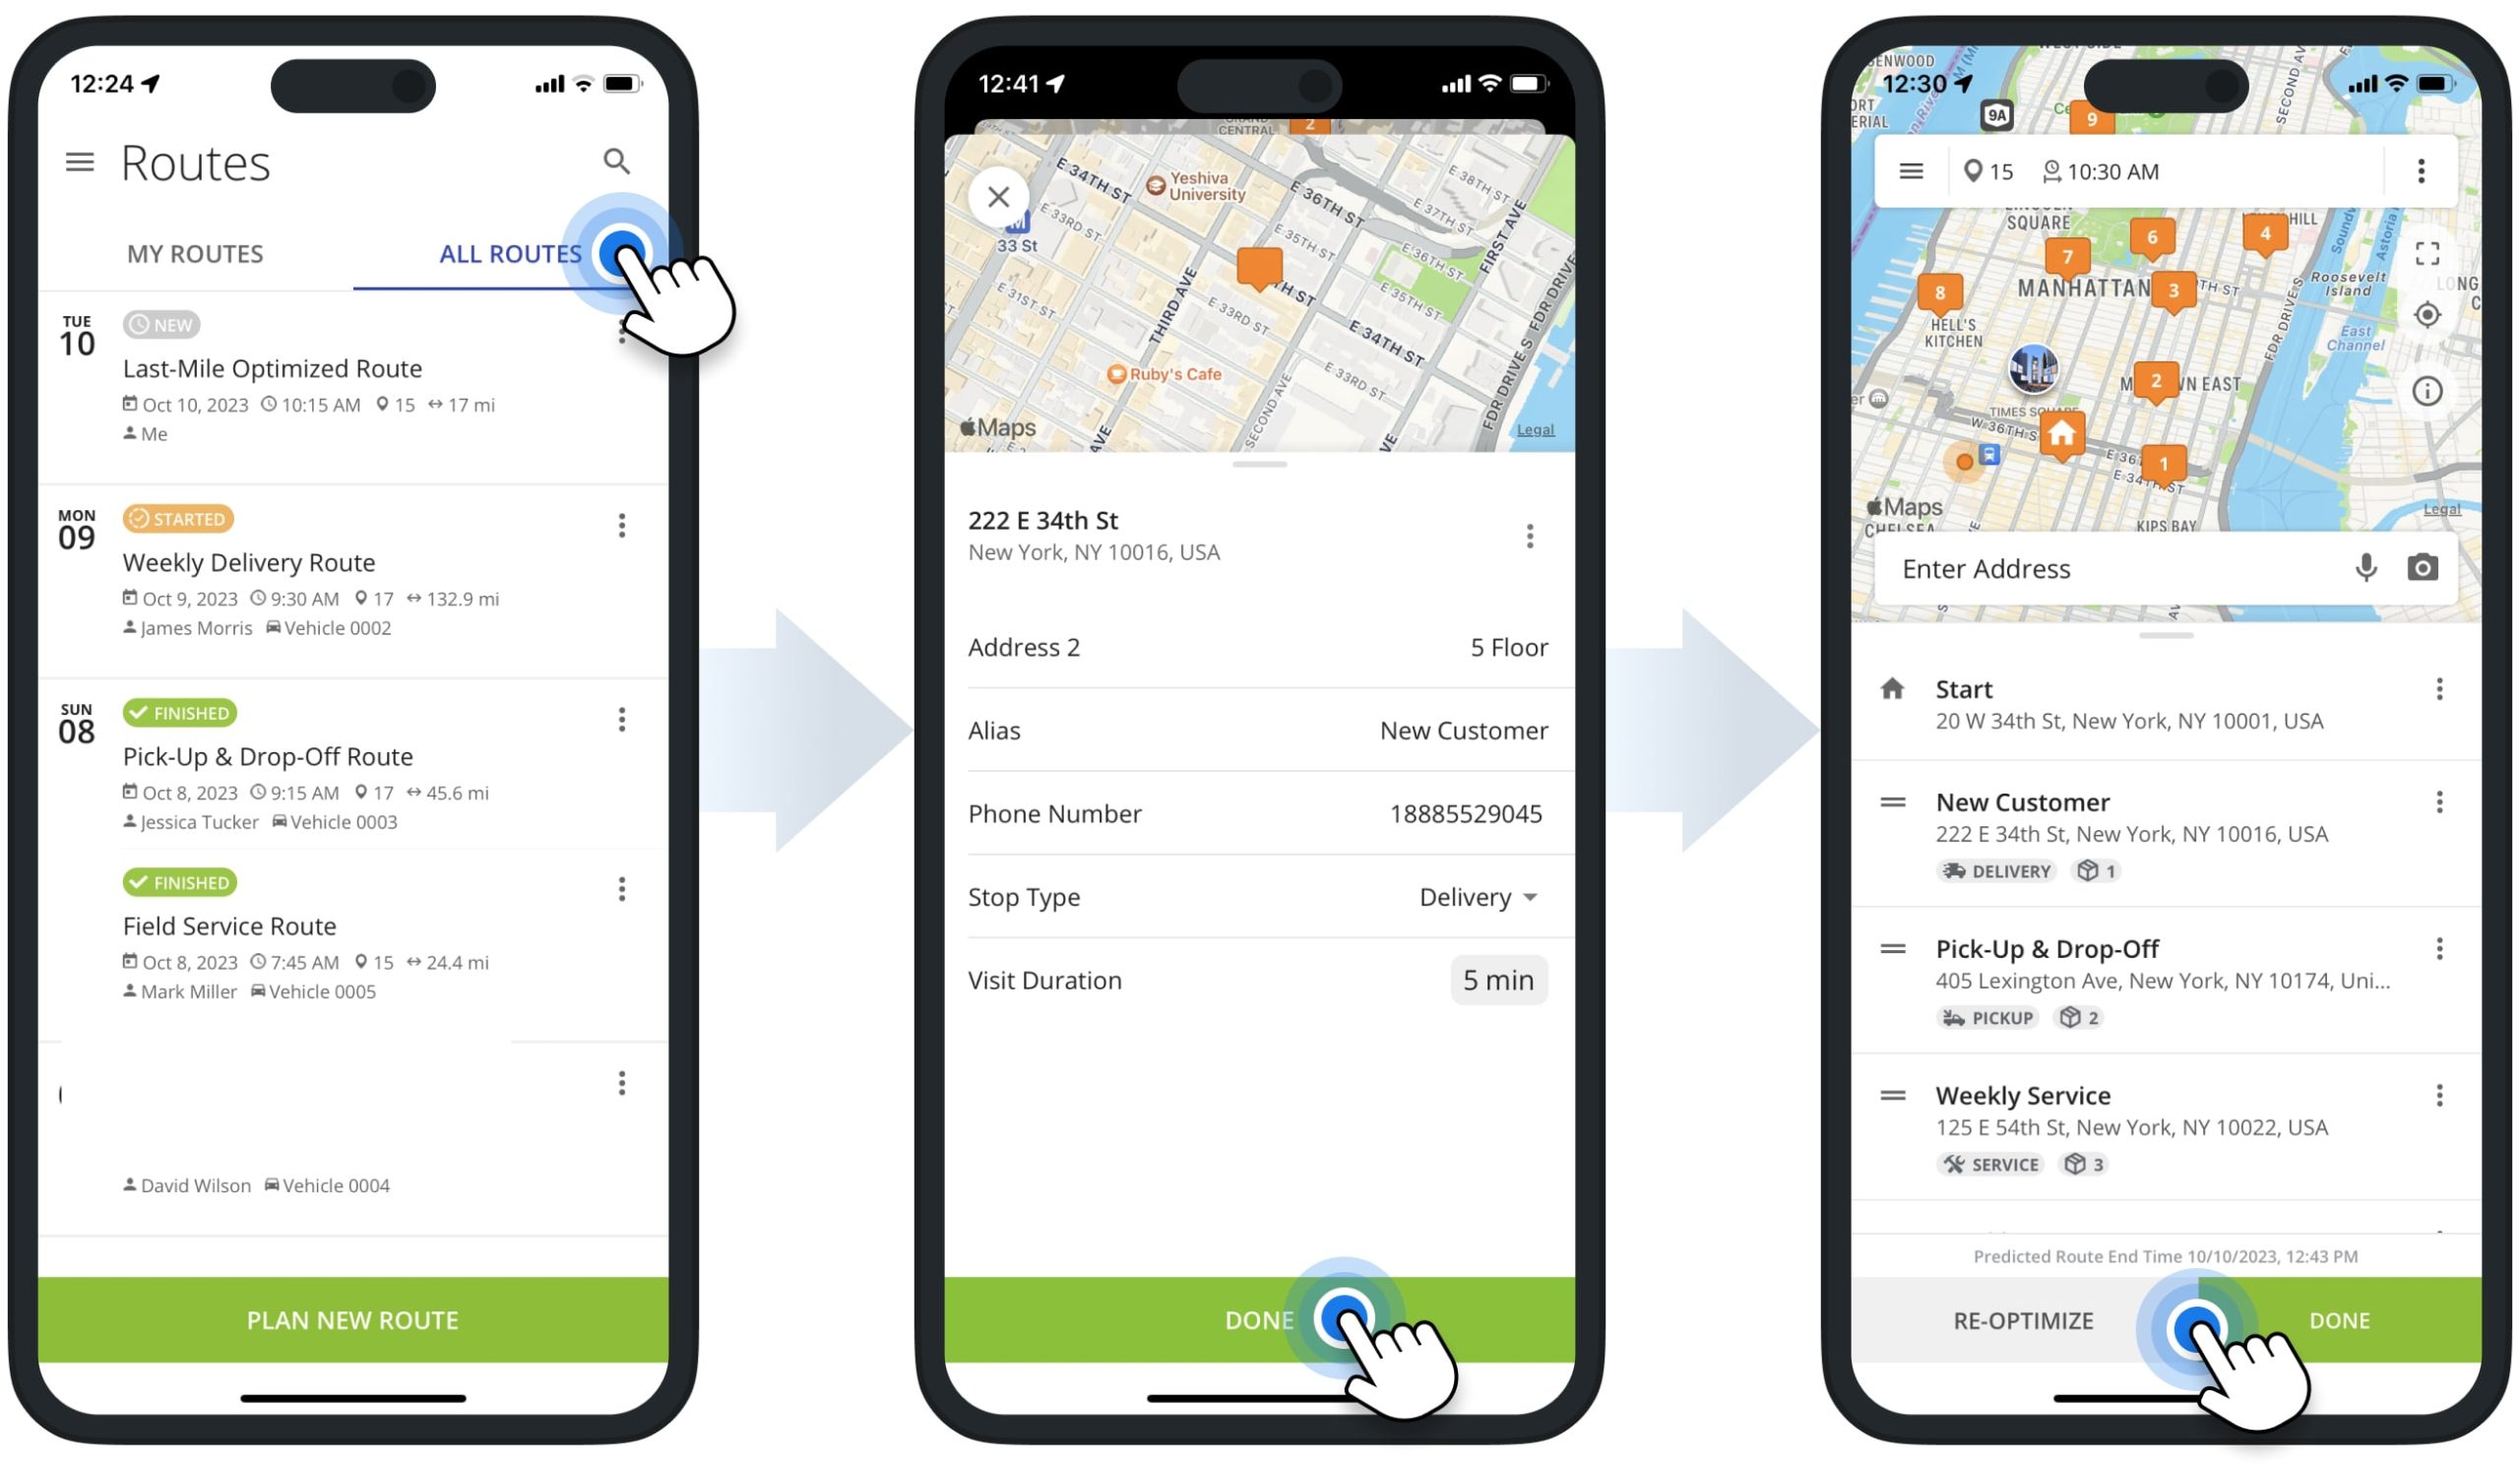 Access and open your and team's routes, manage routes, edit stops, re-optimize routes, change route settings, reschedule routes, etc., on Route4Me's iOS iPhone Route Planner app.